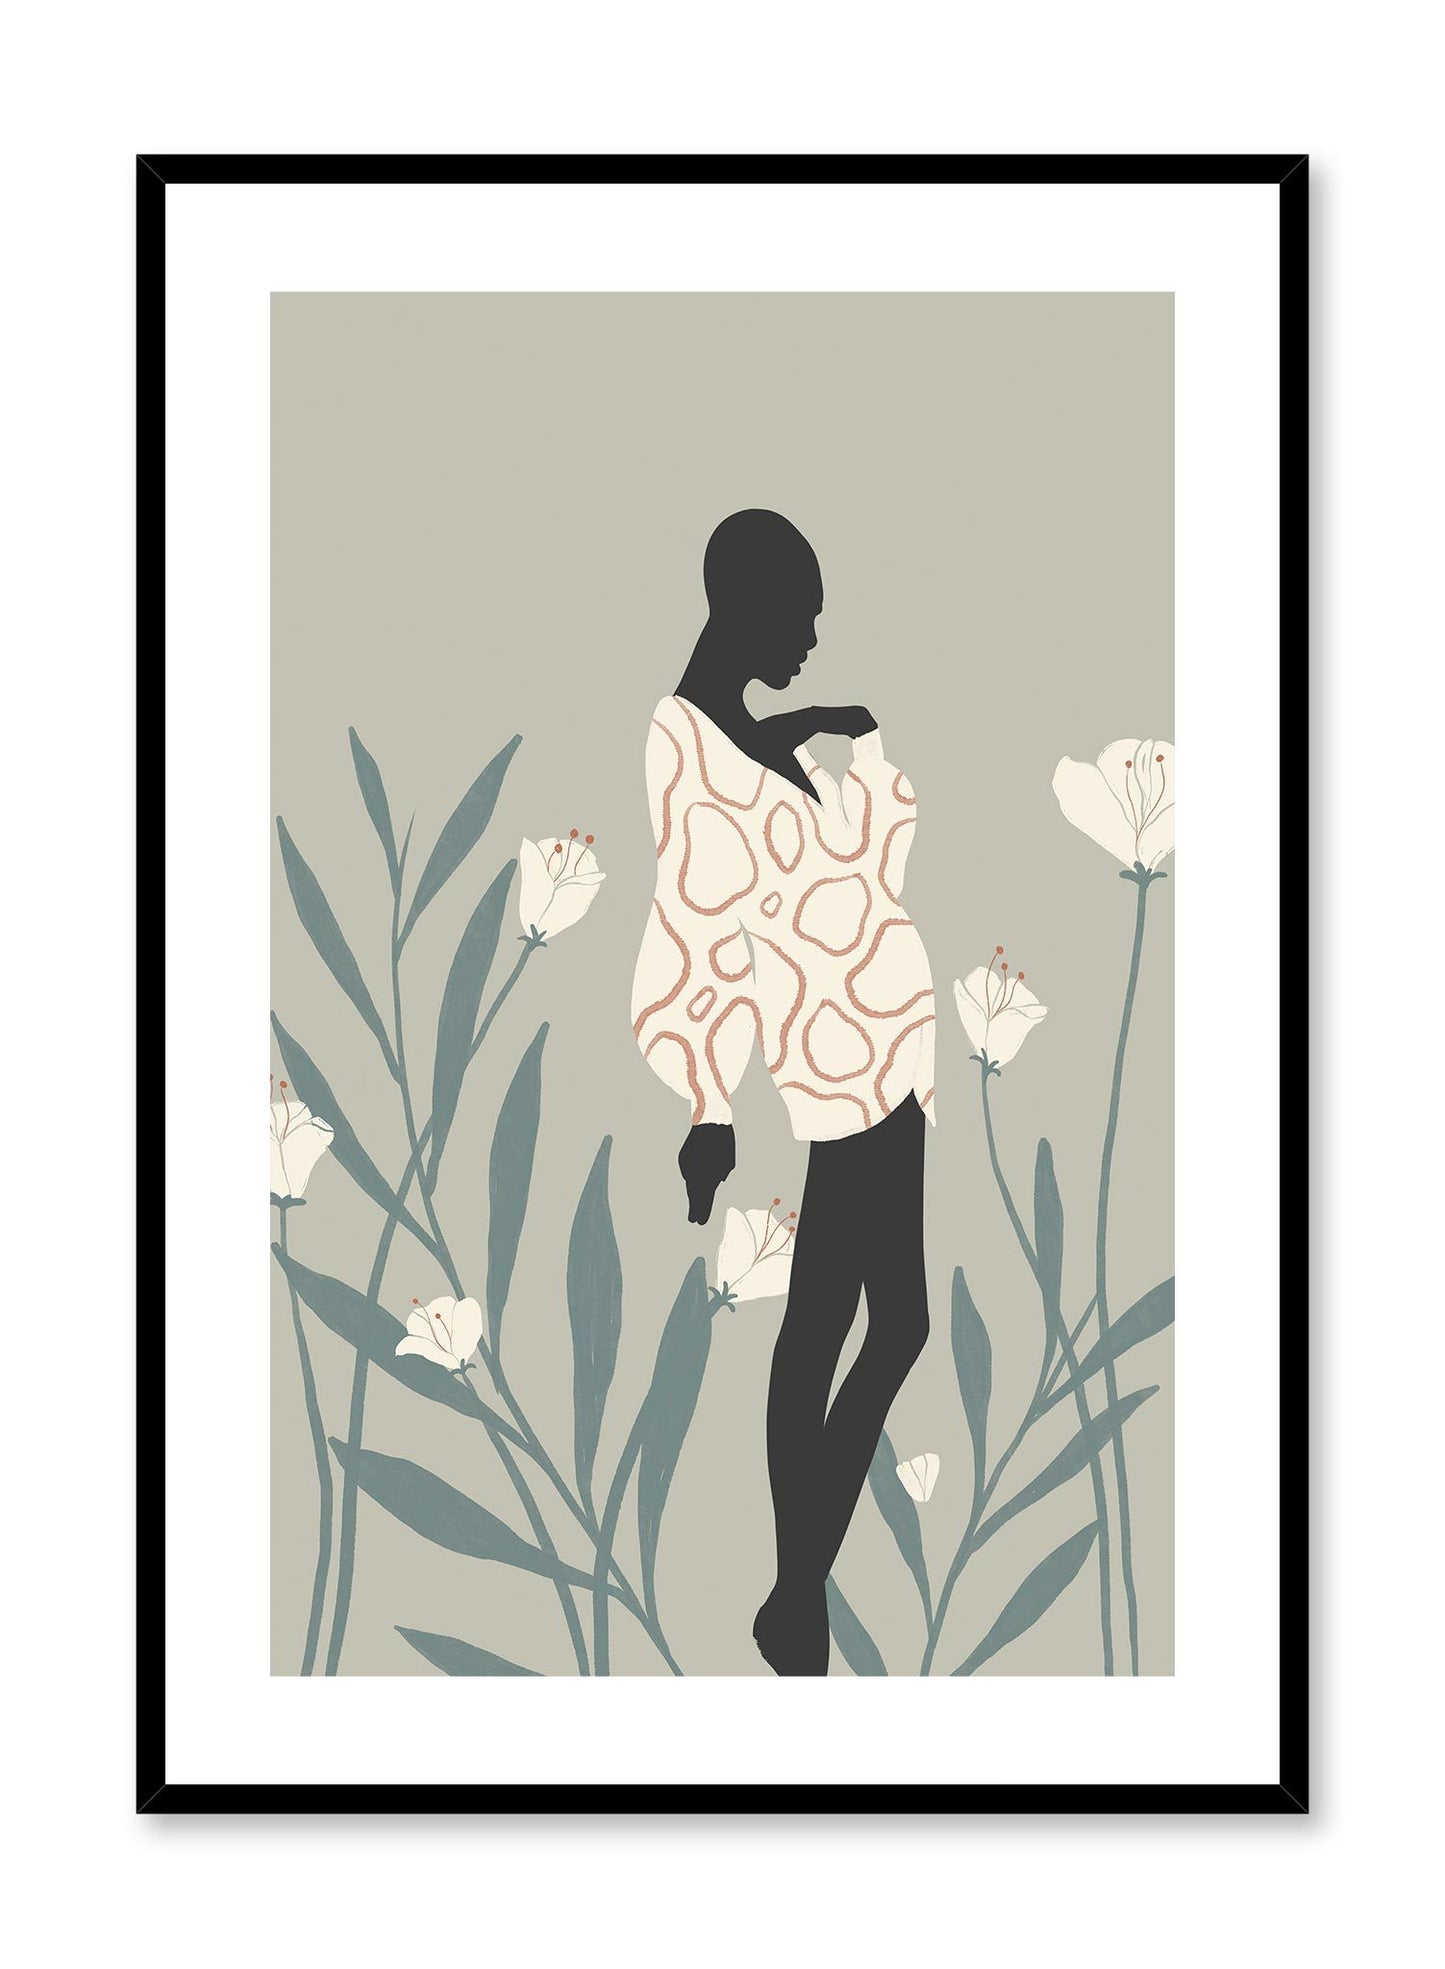 Mudiwa is a minimalist illustration of a beautiful woman wearing a white dress blending in with the white tall flowers in the background by Opposite Wall.